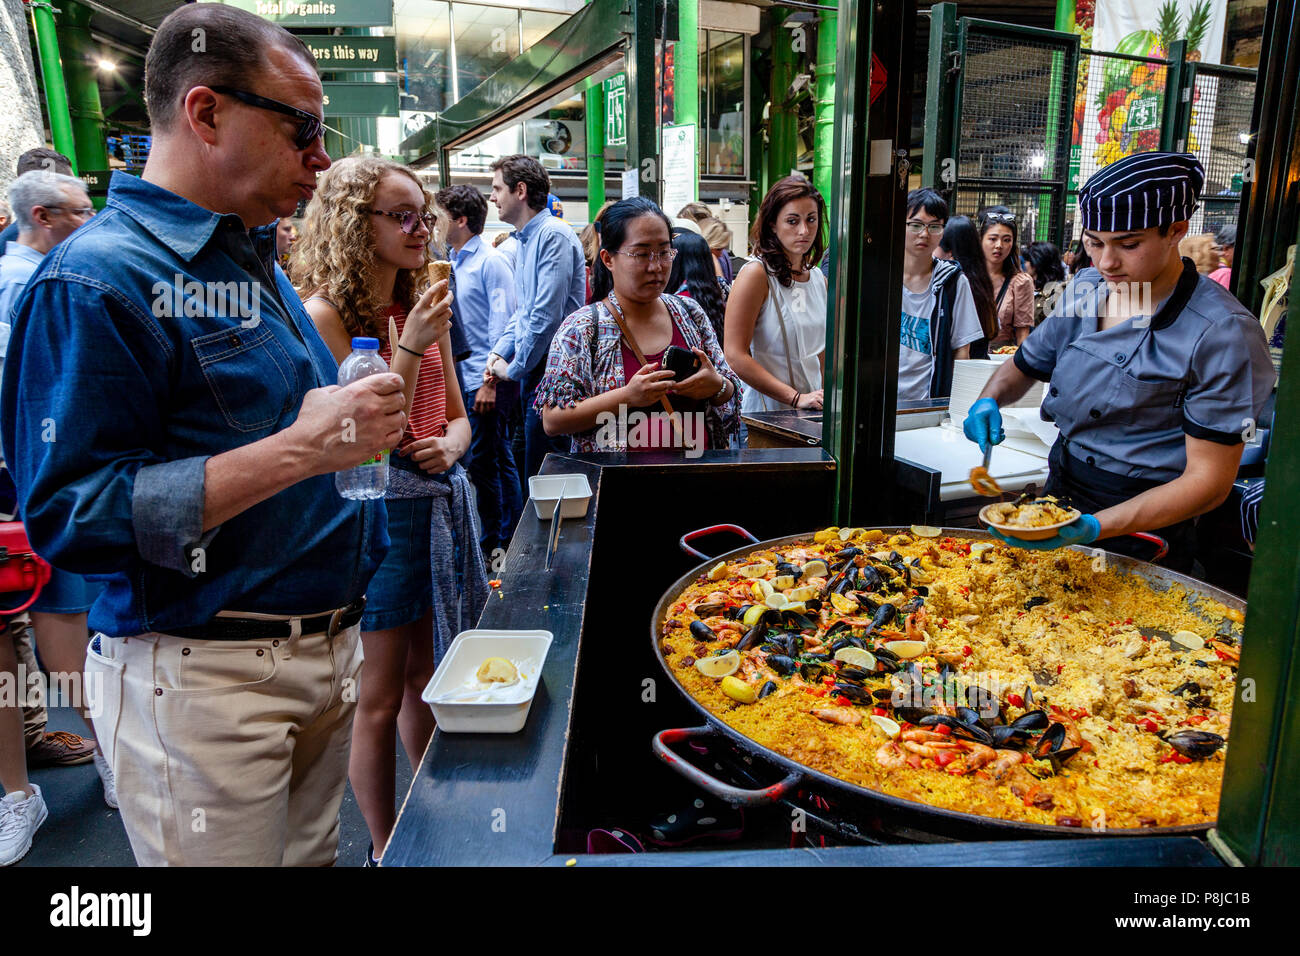 Takeaway Food Being Served At Borough Market, London, England Stock Photo